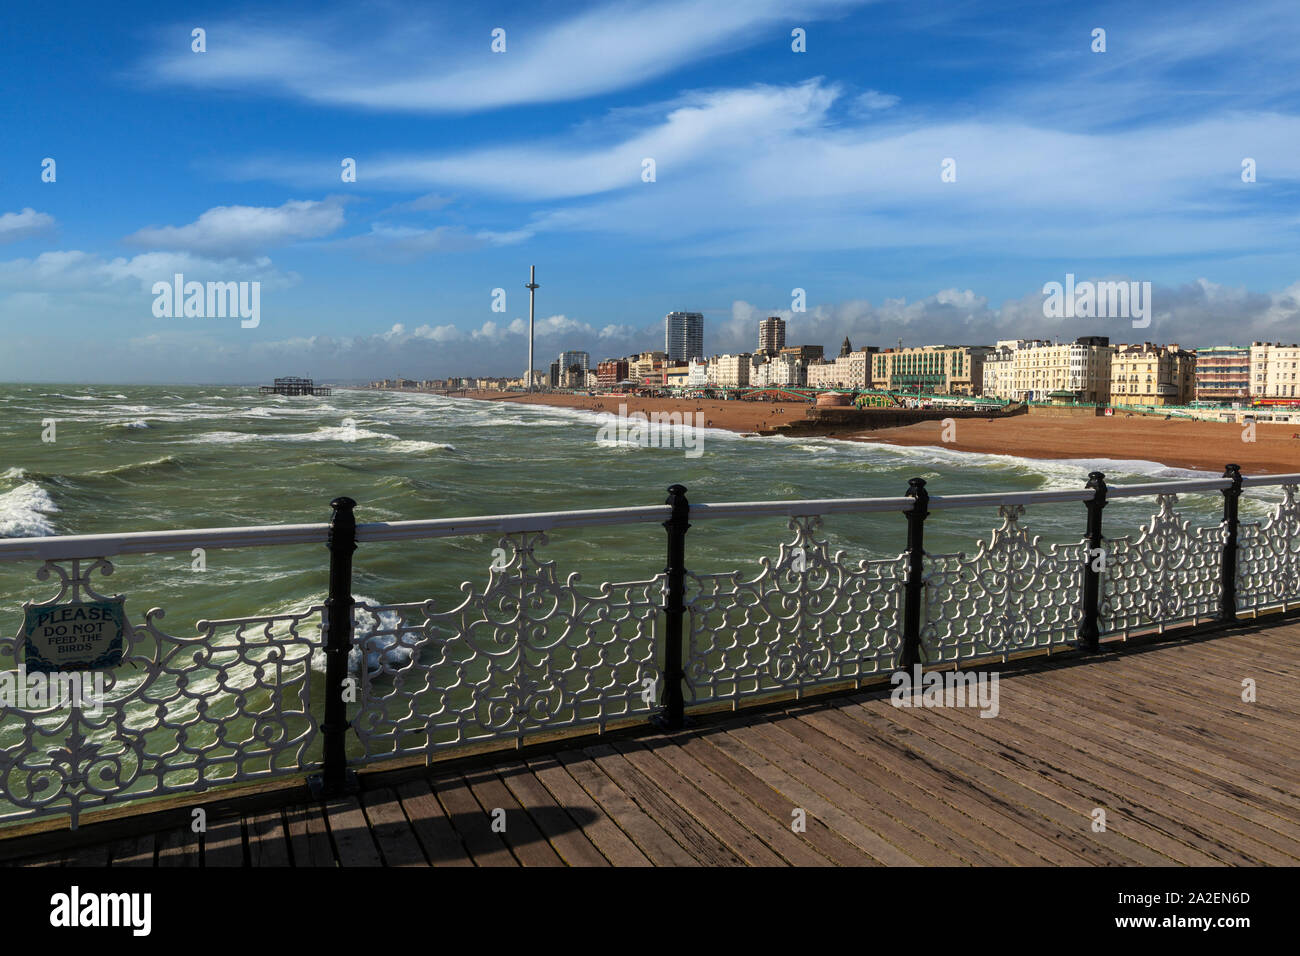 Views of the beach and seafront from Brighton Palace Pier, commonly known as Brighton Pier or the Palace Pier in Brighton, Sussex, England. Stock Photo